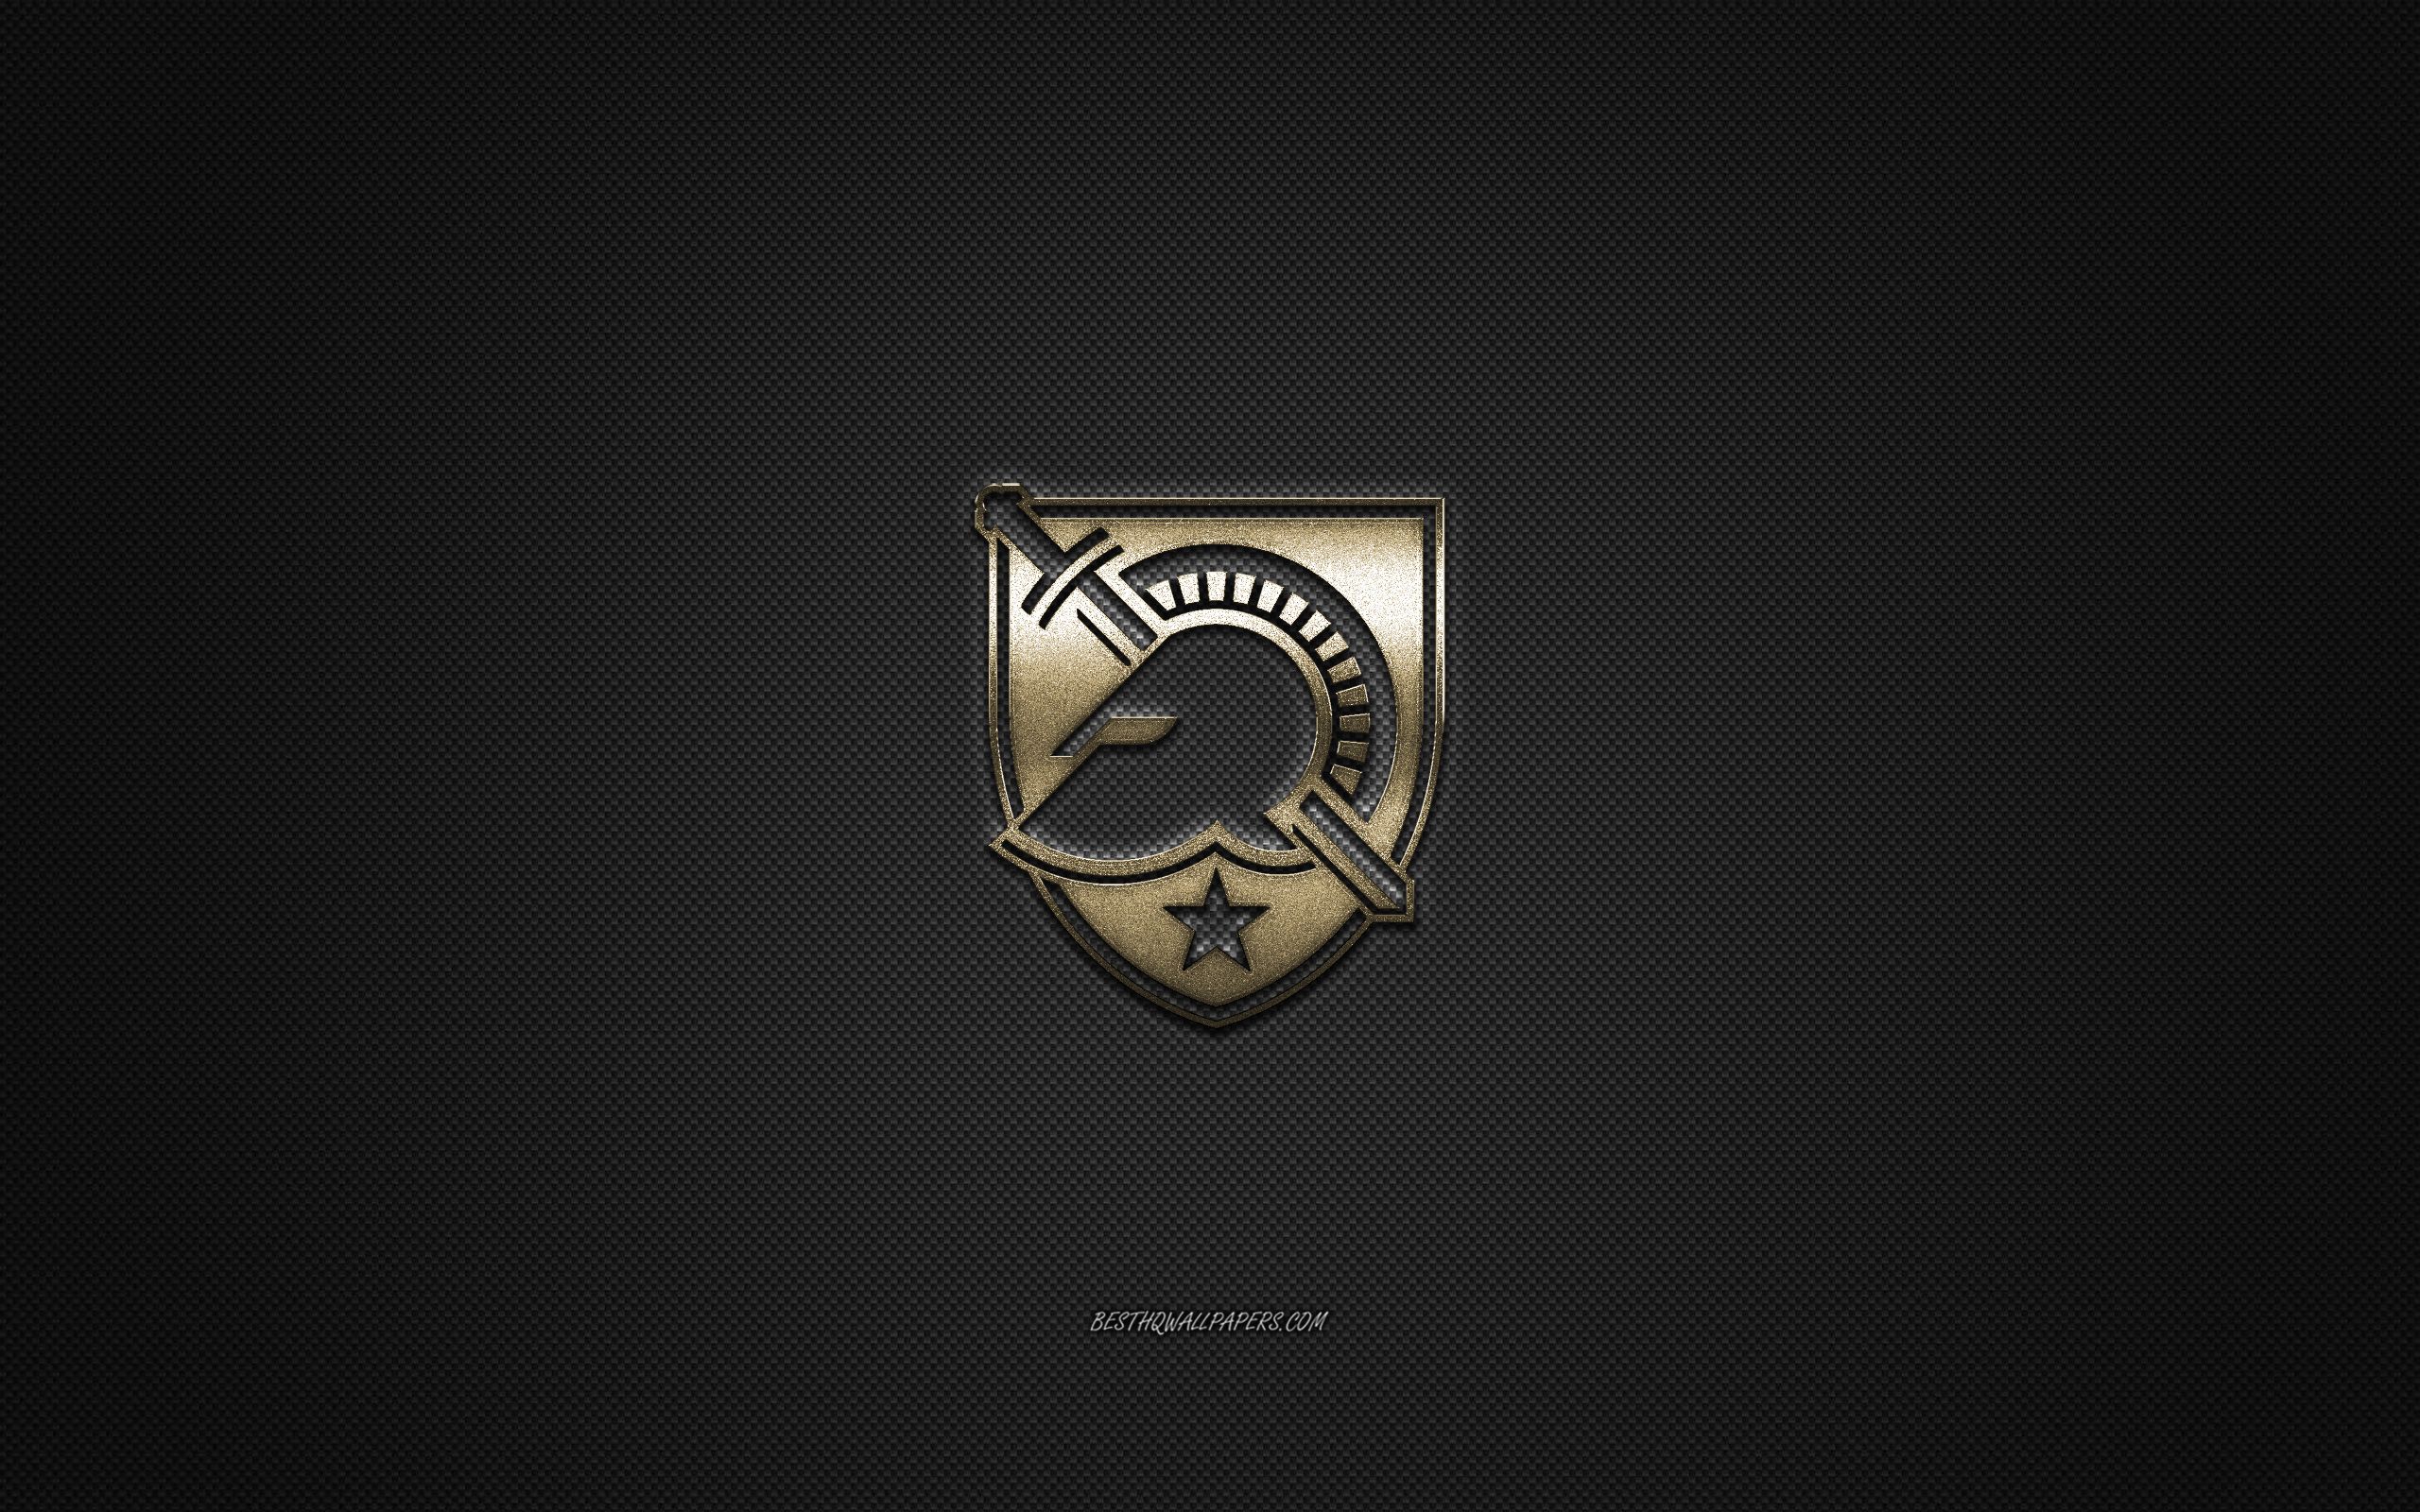 Download wallpaper Army Black Knights logo, American football club, NCAA, golden logo, gray carbon fiber background, American football, West Point, New York, USA, Army Black Knights for desktop with resolution 2560x1600. High